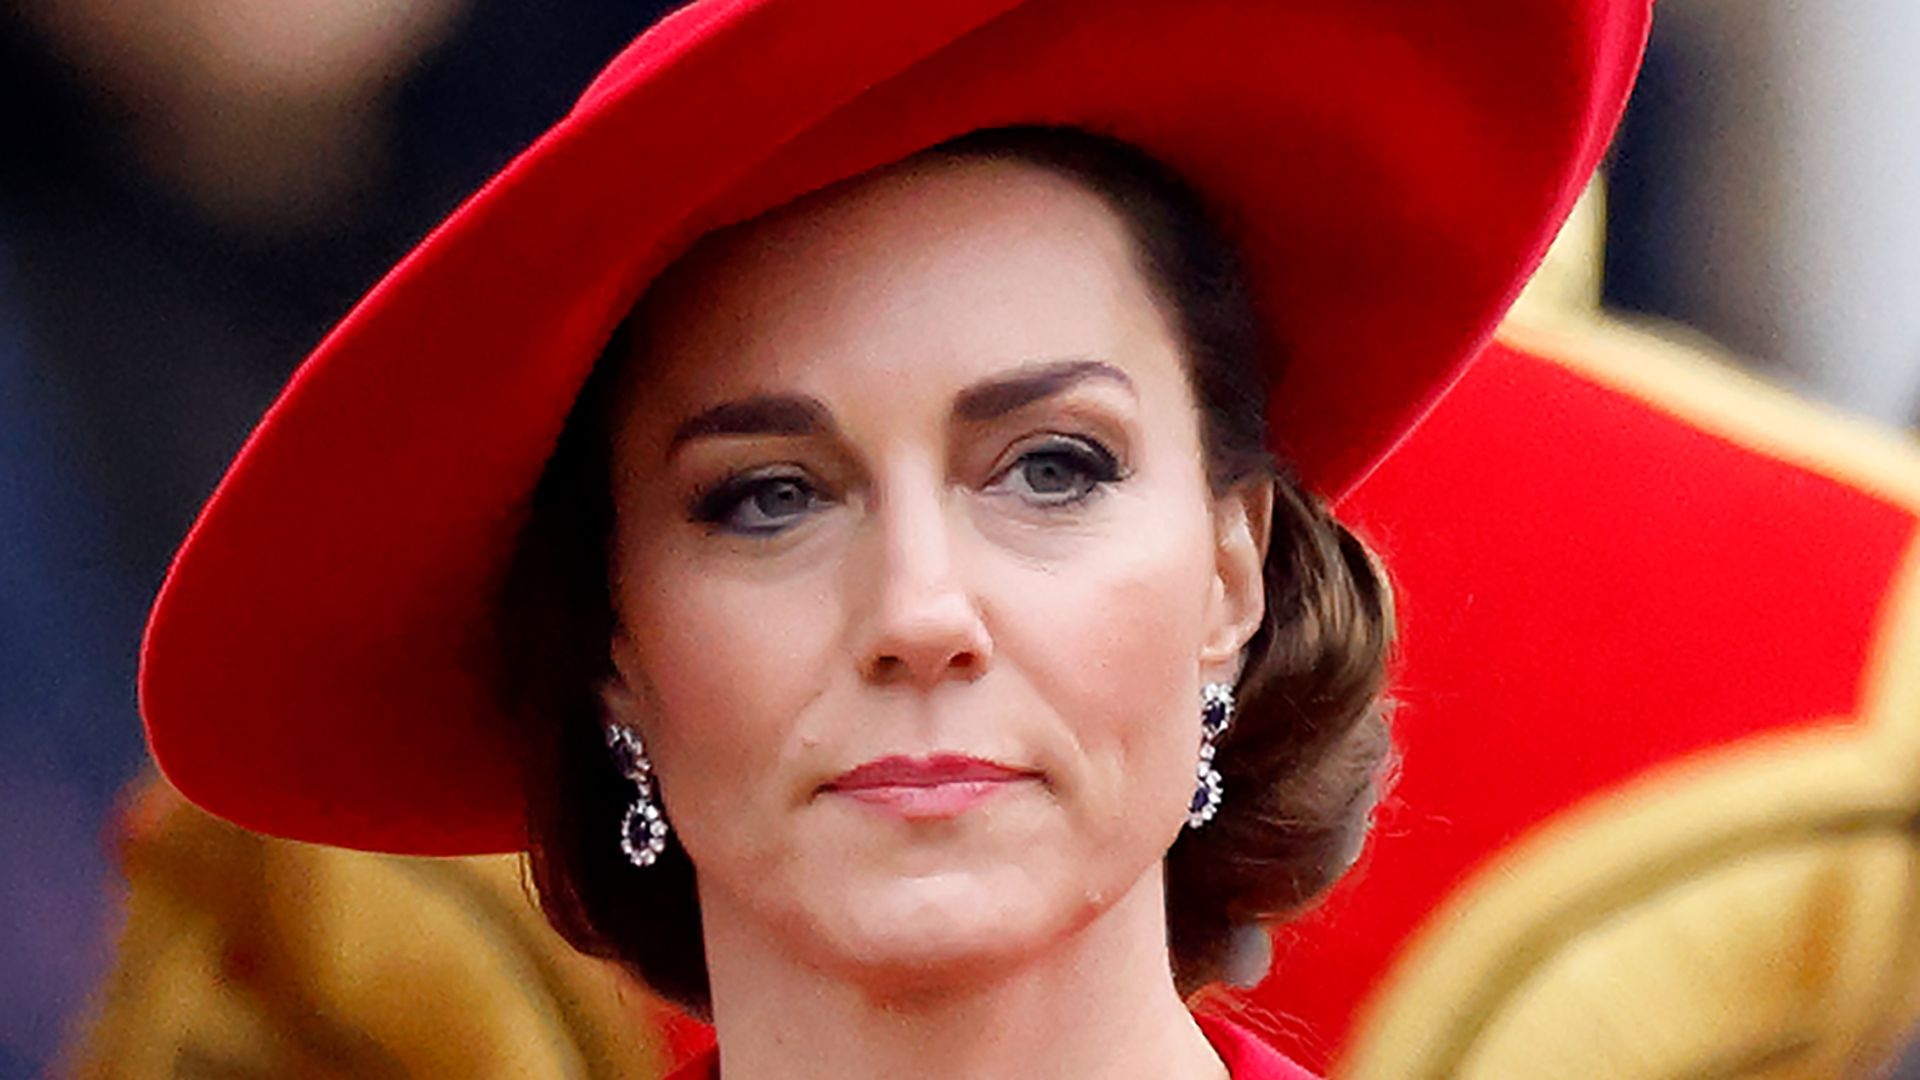 Princess Kate looking serious as she attends a ceremonial welcome for the President and the First Lady of the Republic of Korea in November